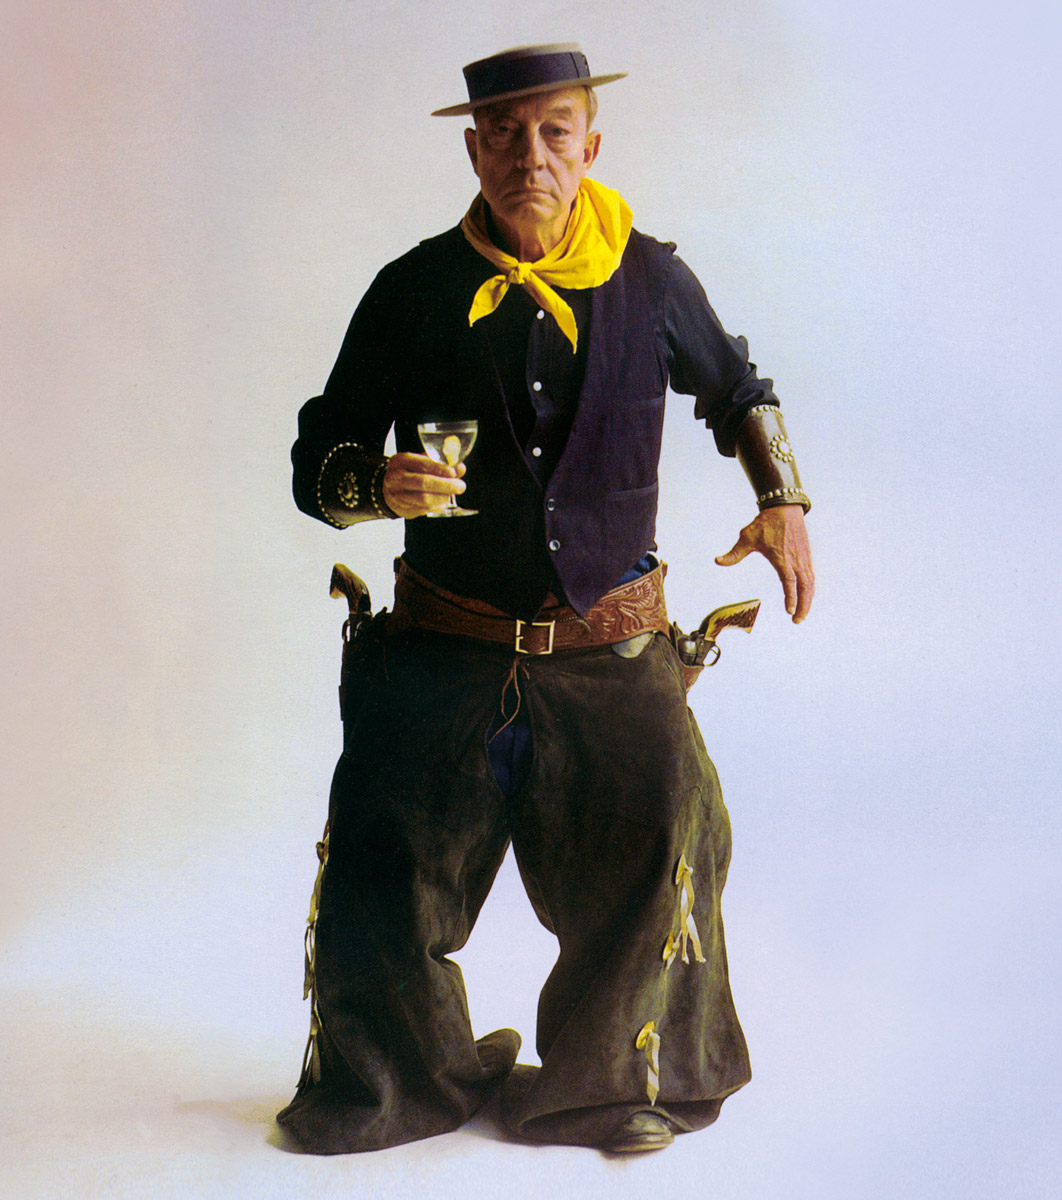 A photograph of Keaton dressed as a cowboy posing for a nineteen fifty-seven Smirnoff vodka advert.